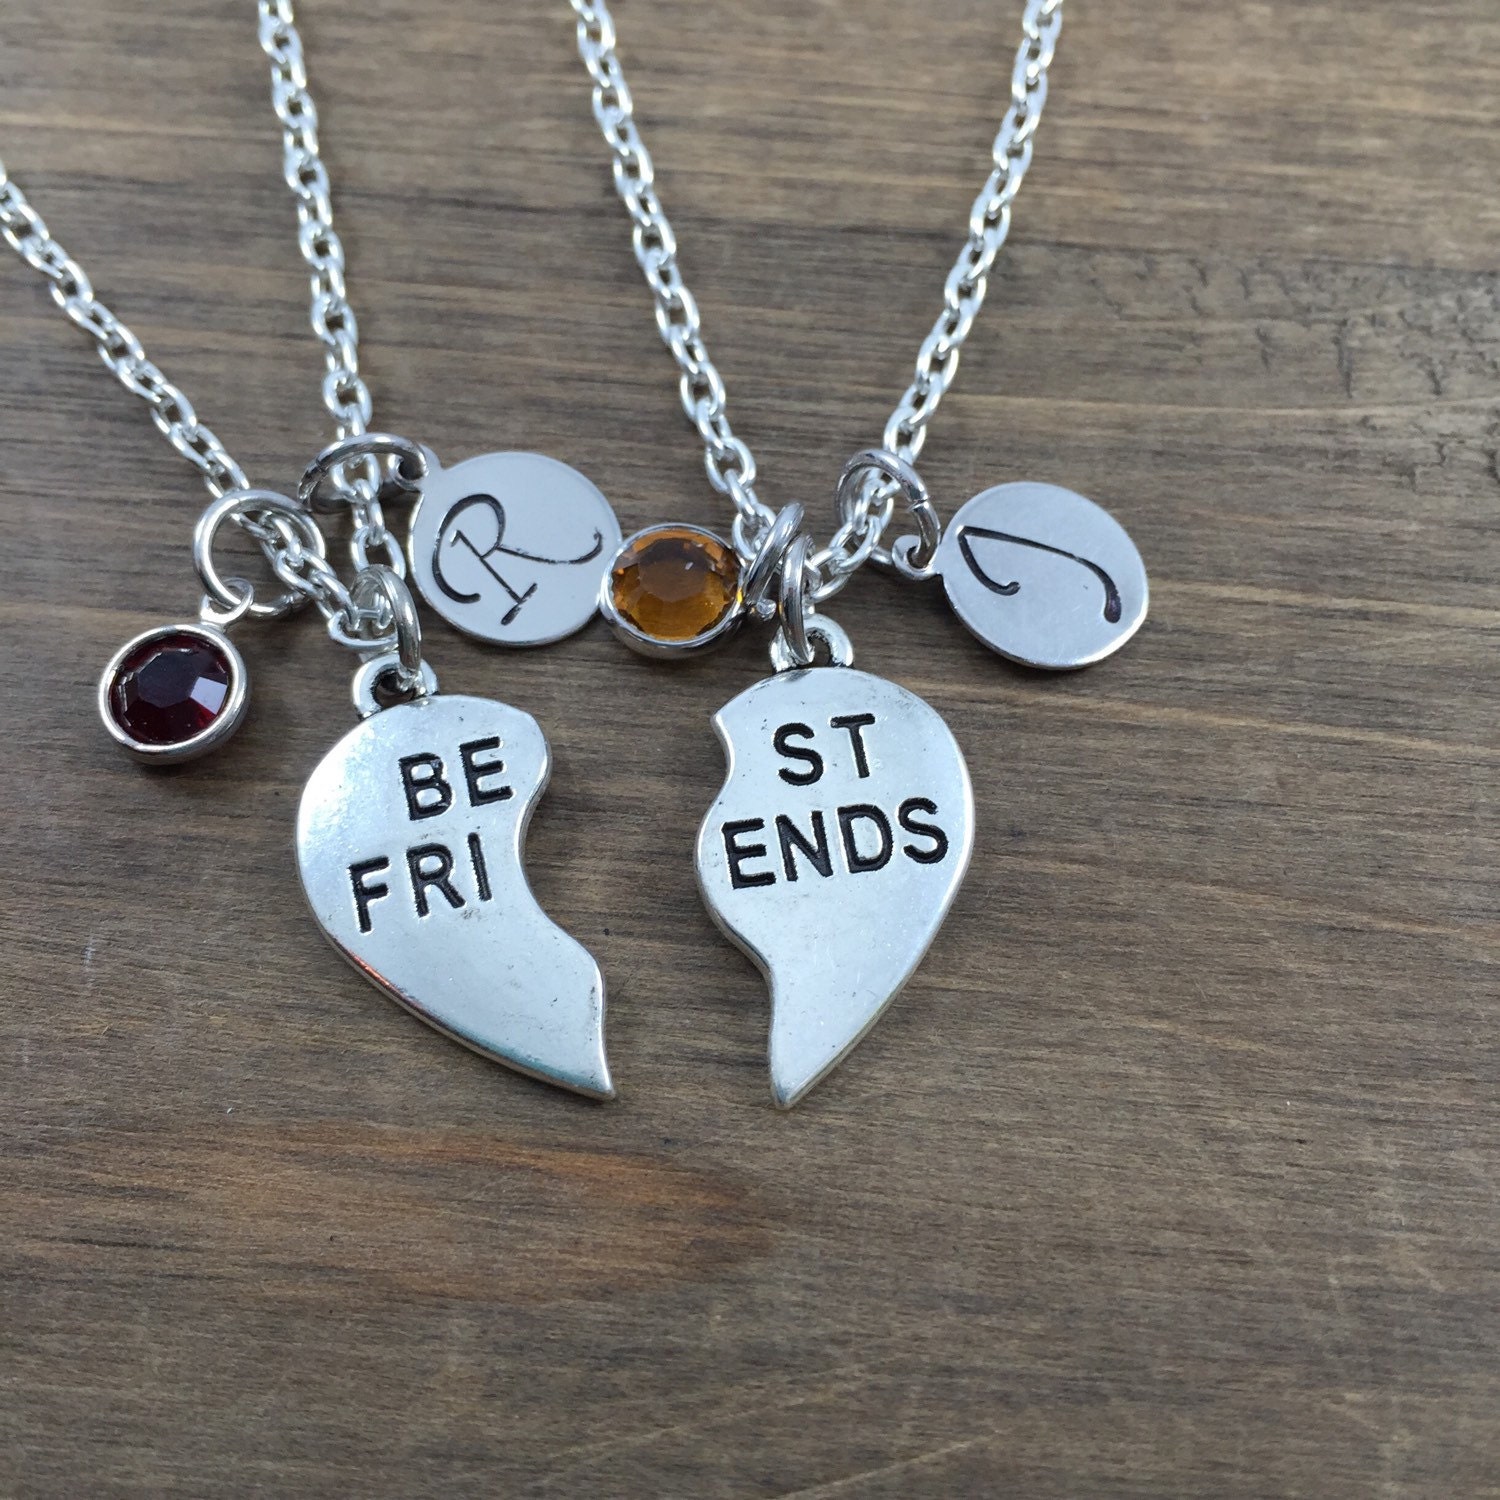 Best Friends Necklaces Personalized Hand By Sunflowershadows 